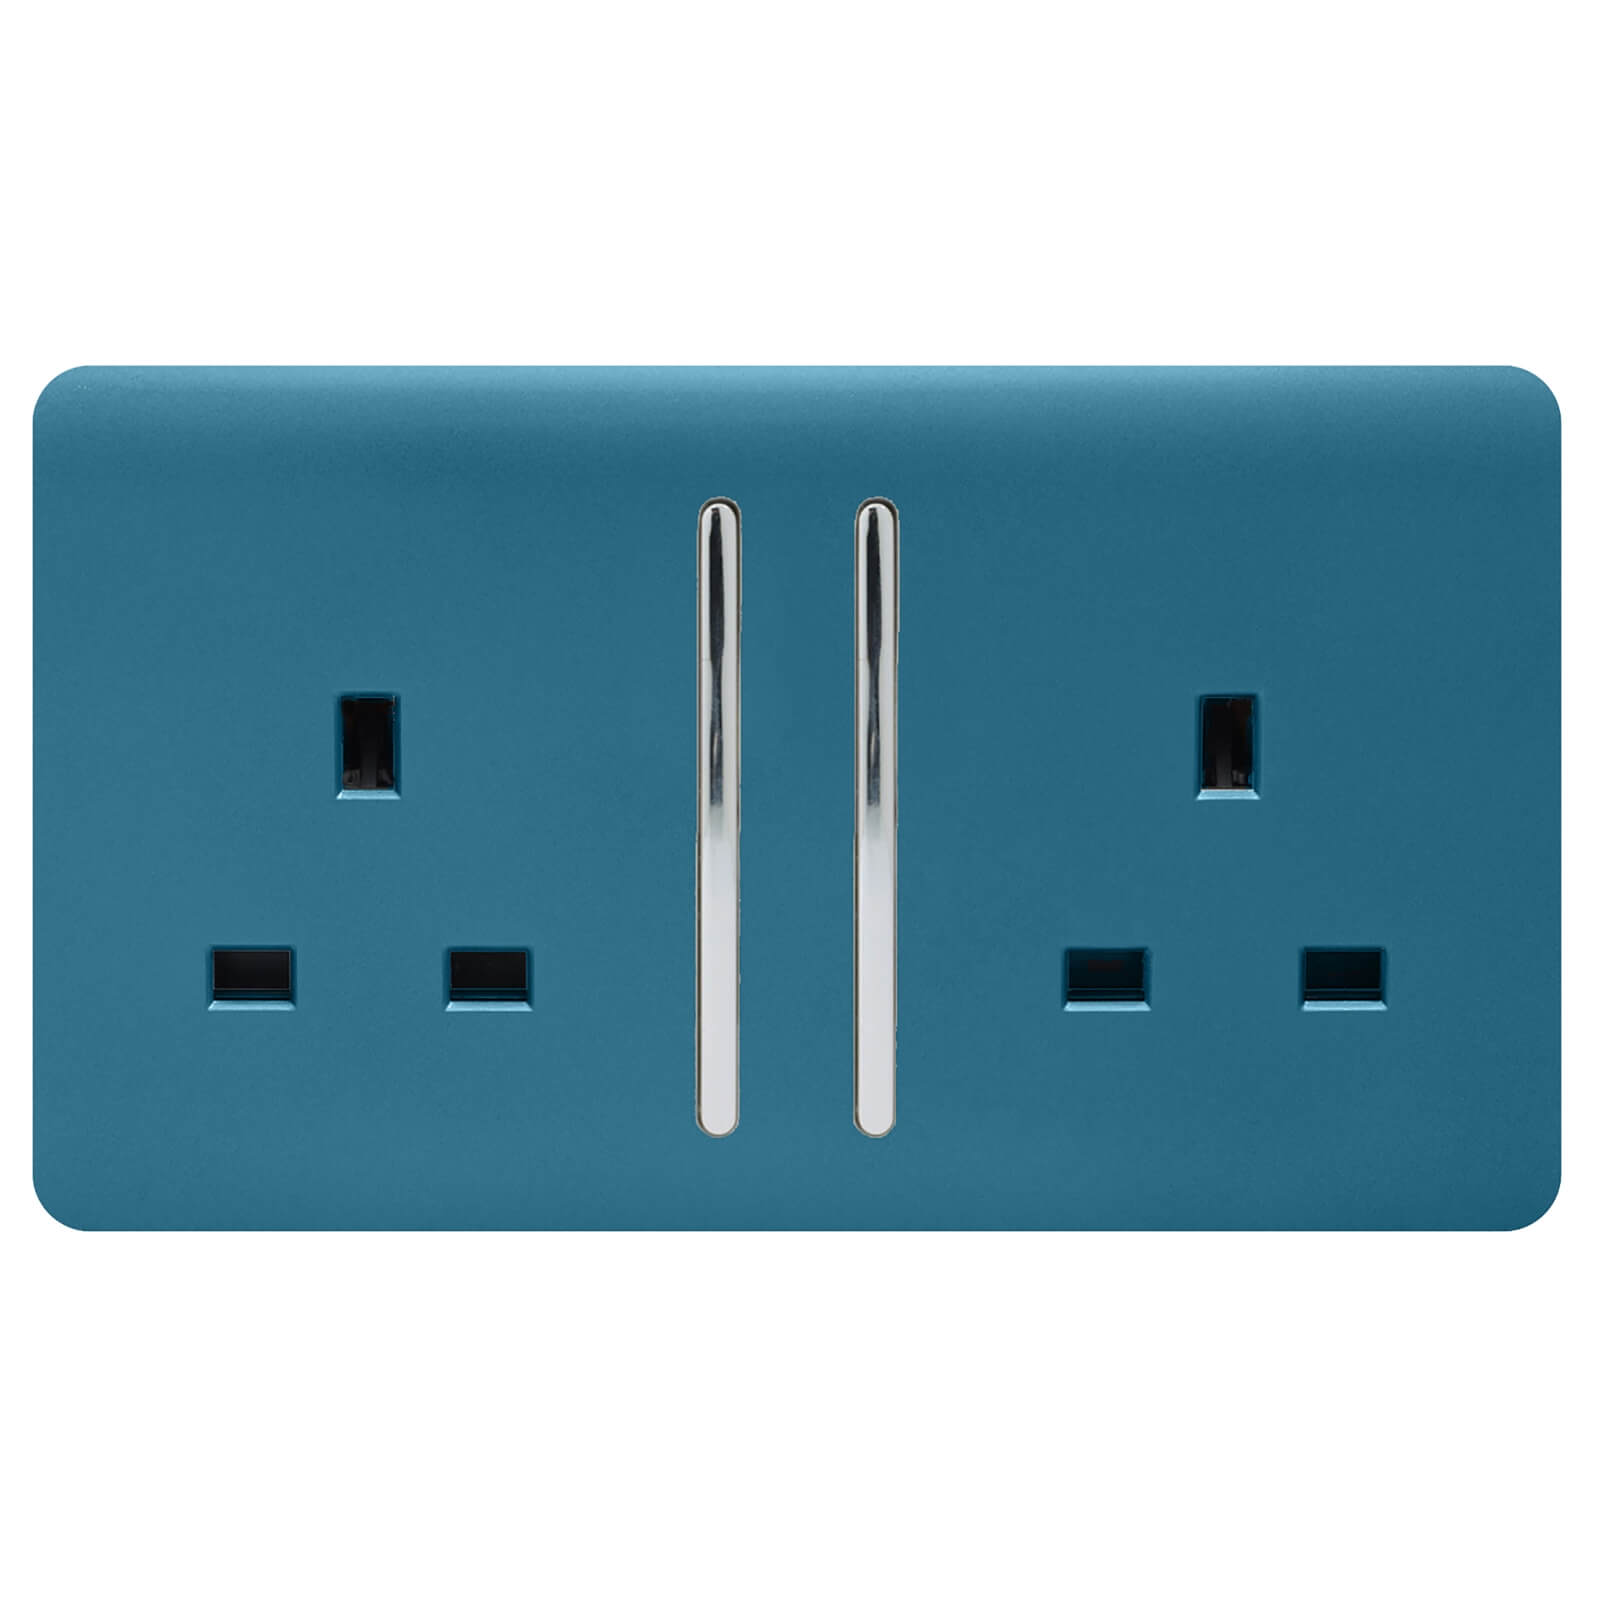 Trendi Switch 2 Gang 13Amp Long Switched Socket in Ocean Blue